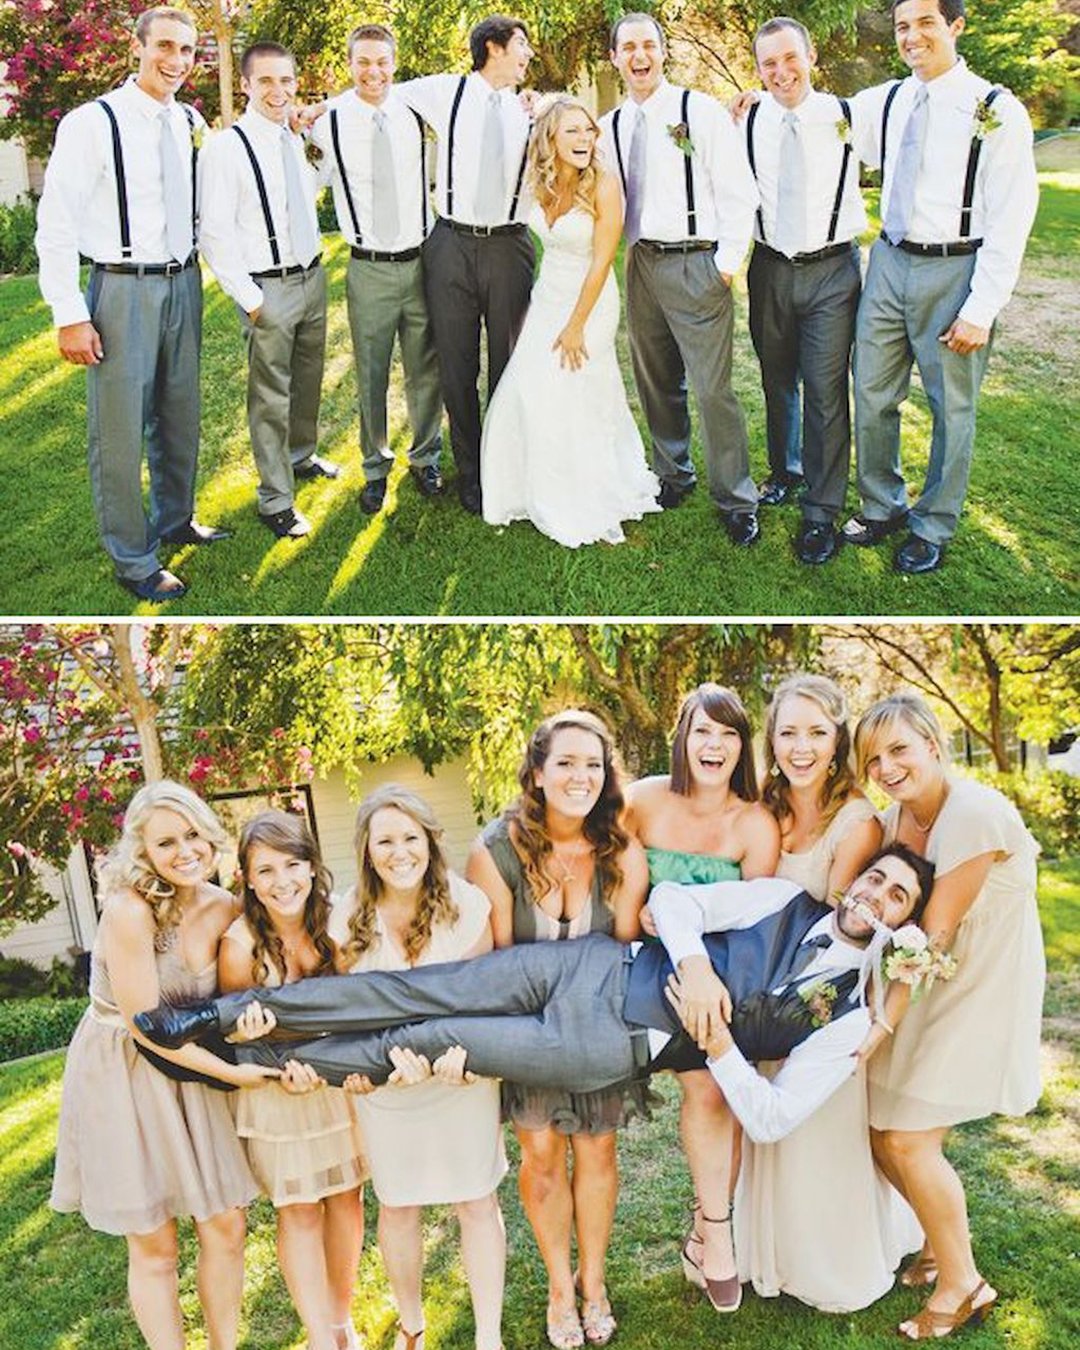 must have wedding photos funny pictures withbridesmaids and grromsmen jodie szablowski photography